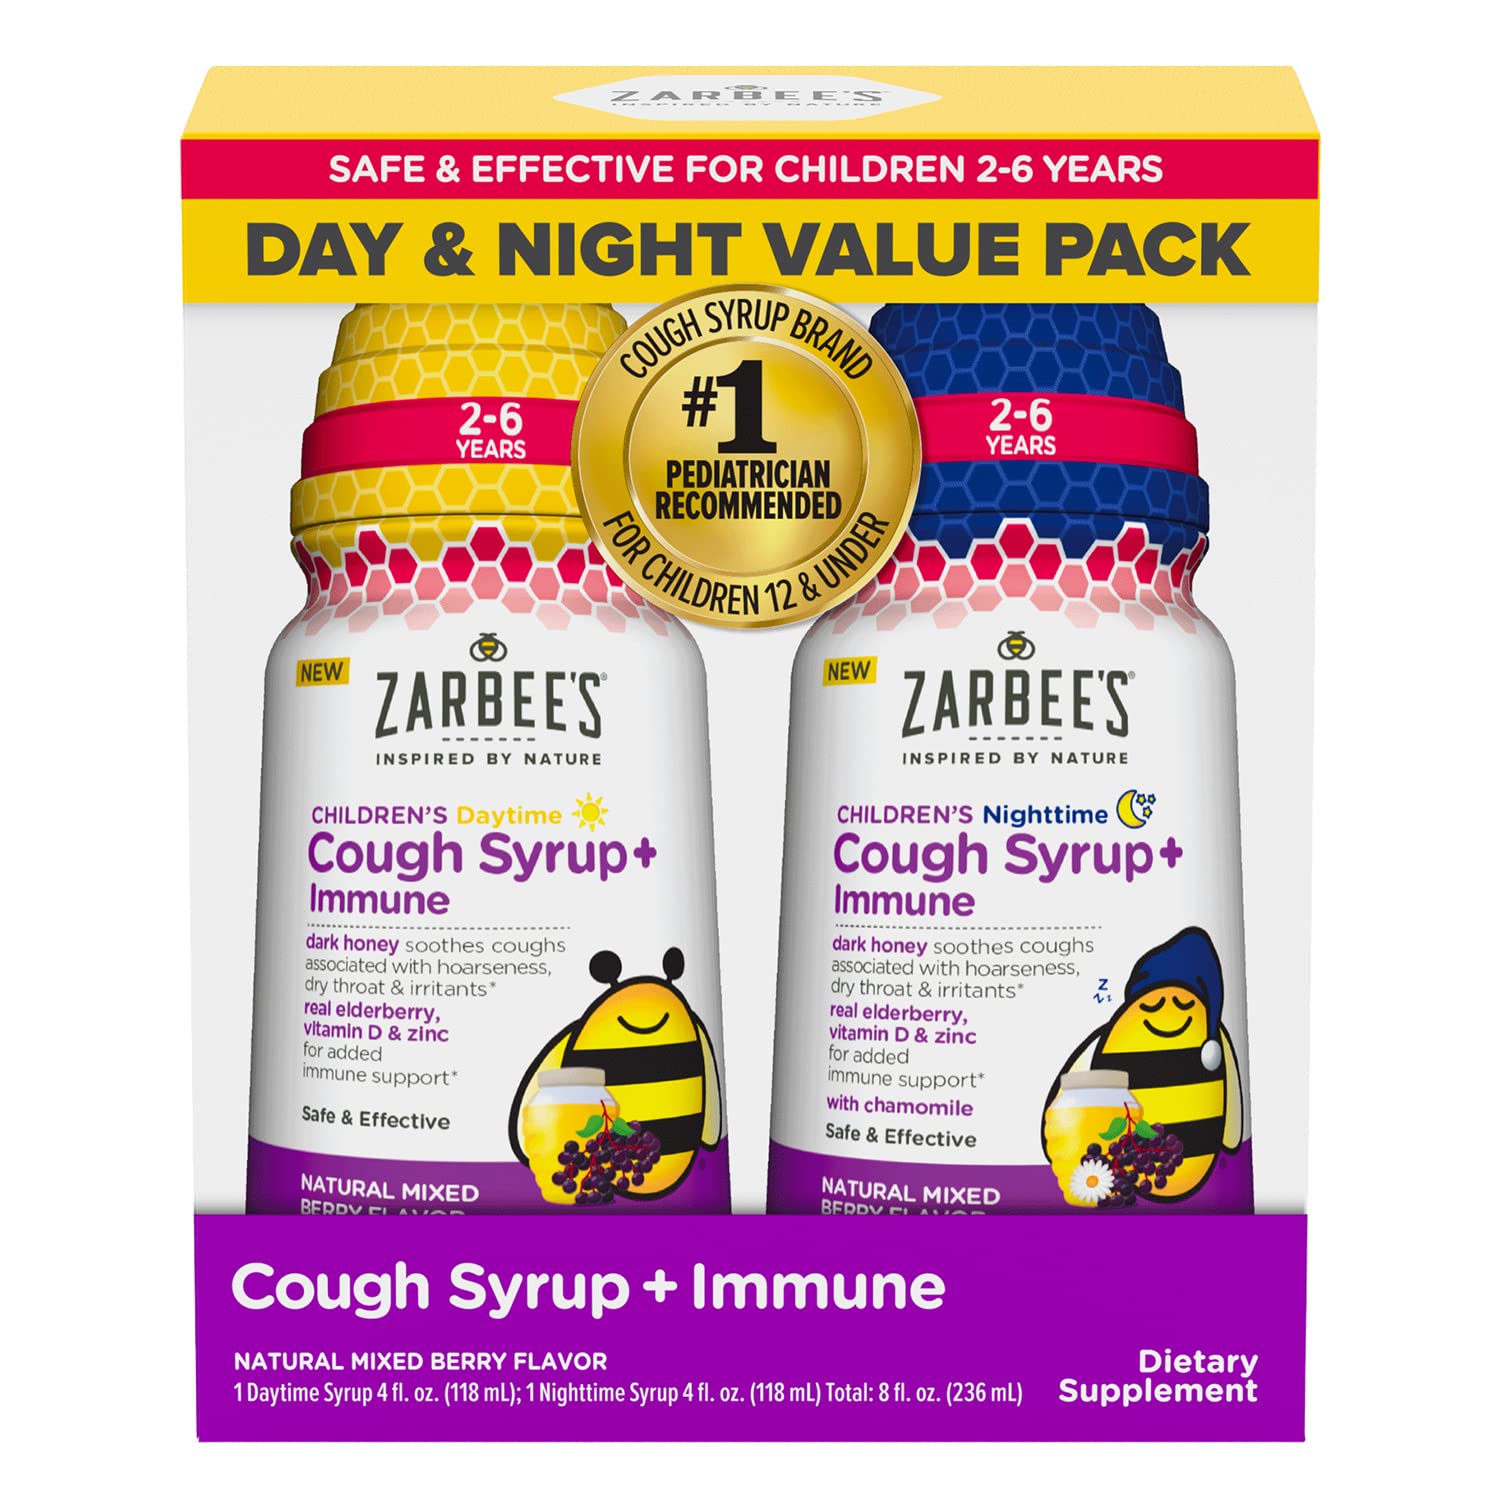 Zarbee's Kids Cough + Immune Day/Night Value Pack for Children 2-6 with Dark Honey, Vitamin D & Zinc, 1 Pediatrician Recommended, Drug & Alcohol-Free, Mixed Berry Flavor, 2x4FL Oz